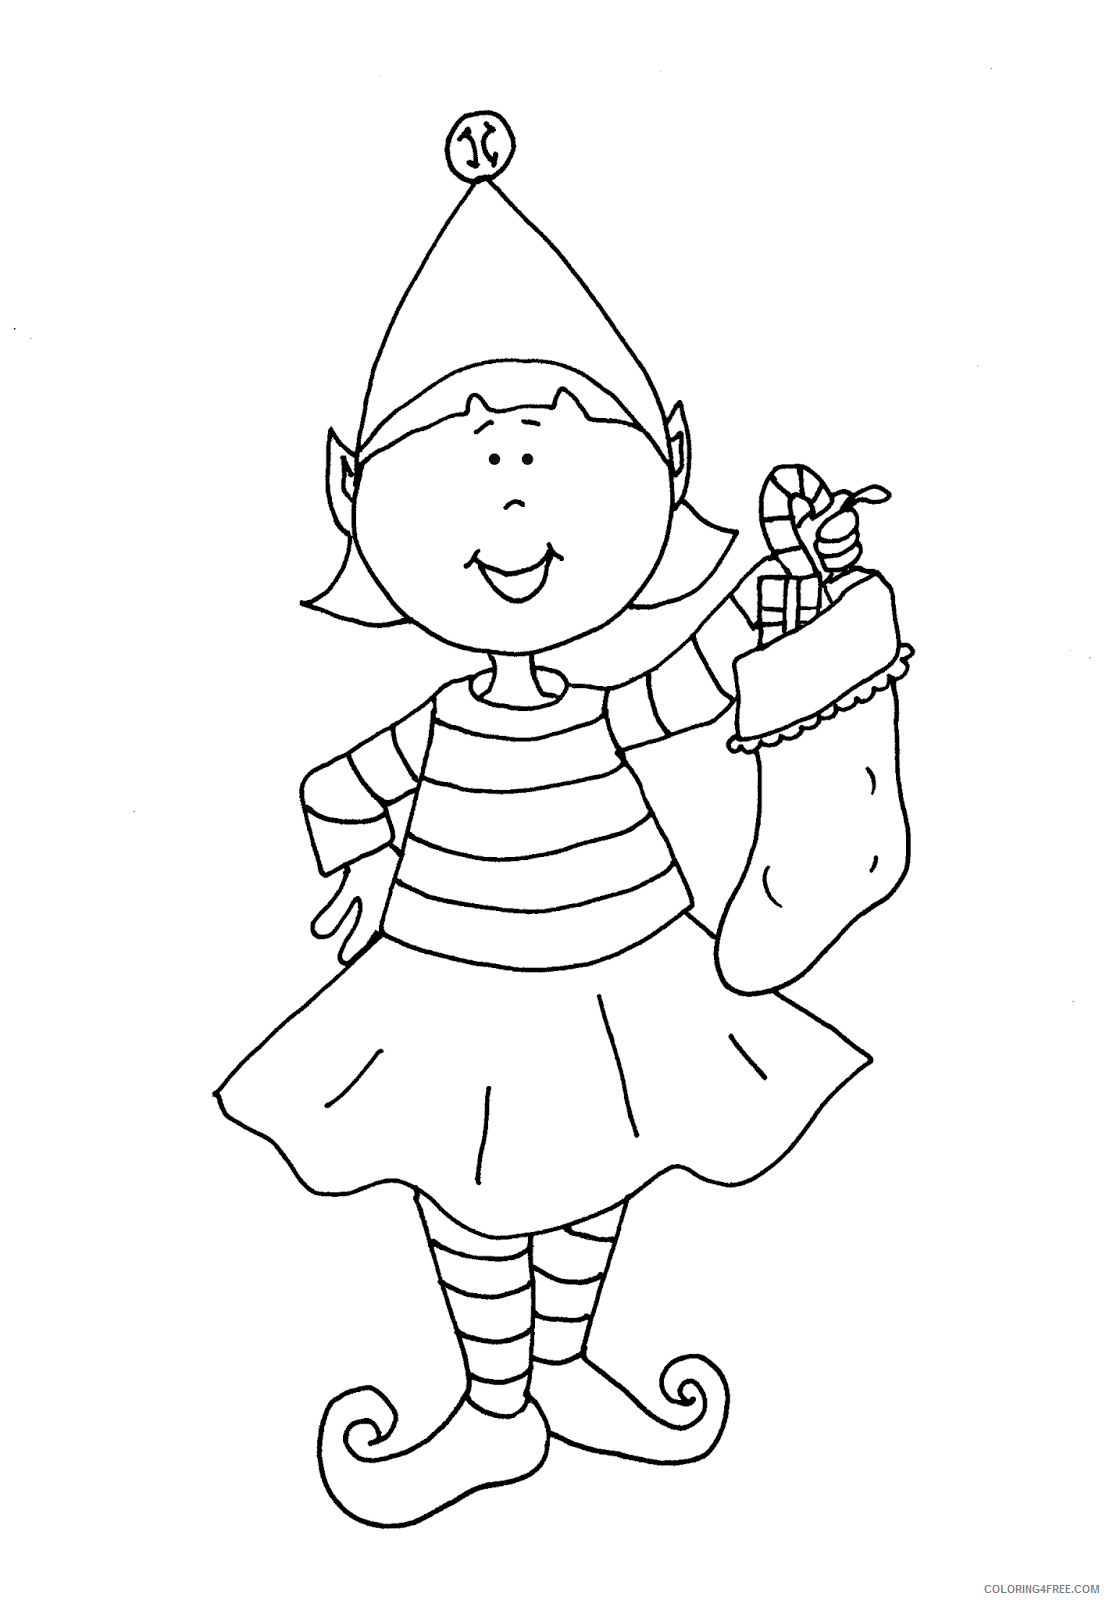 elf coloring pages with christmas stockings Coloring4free